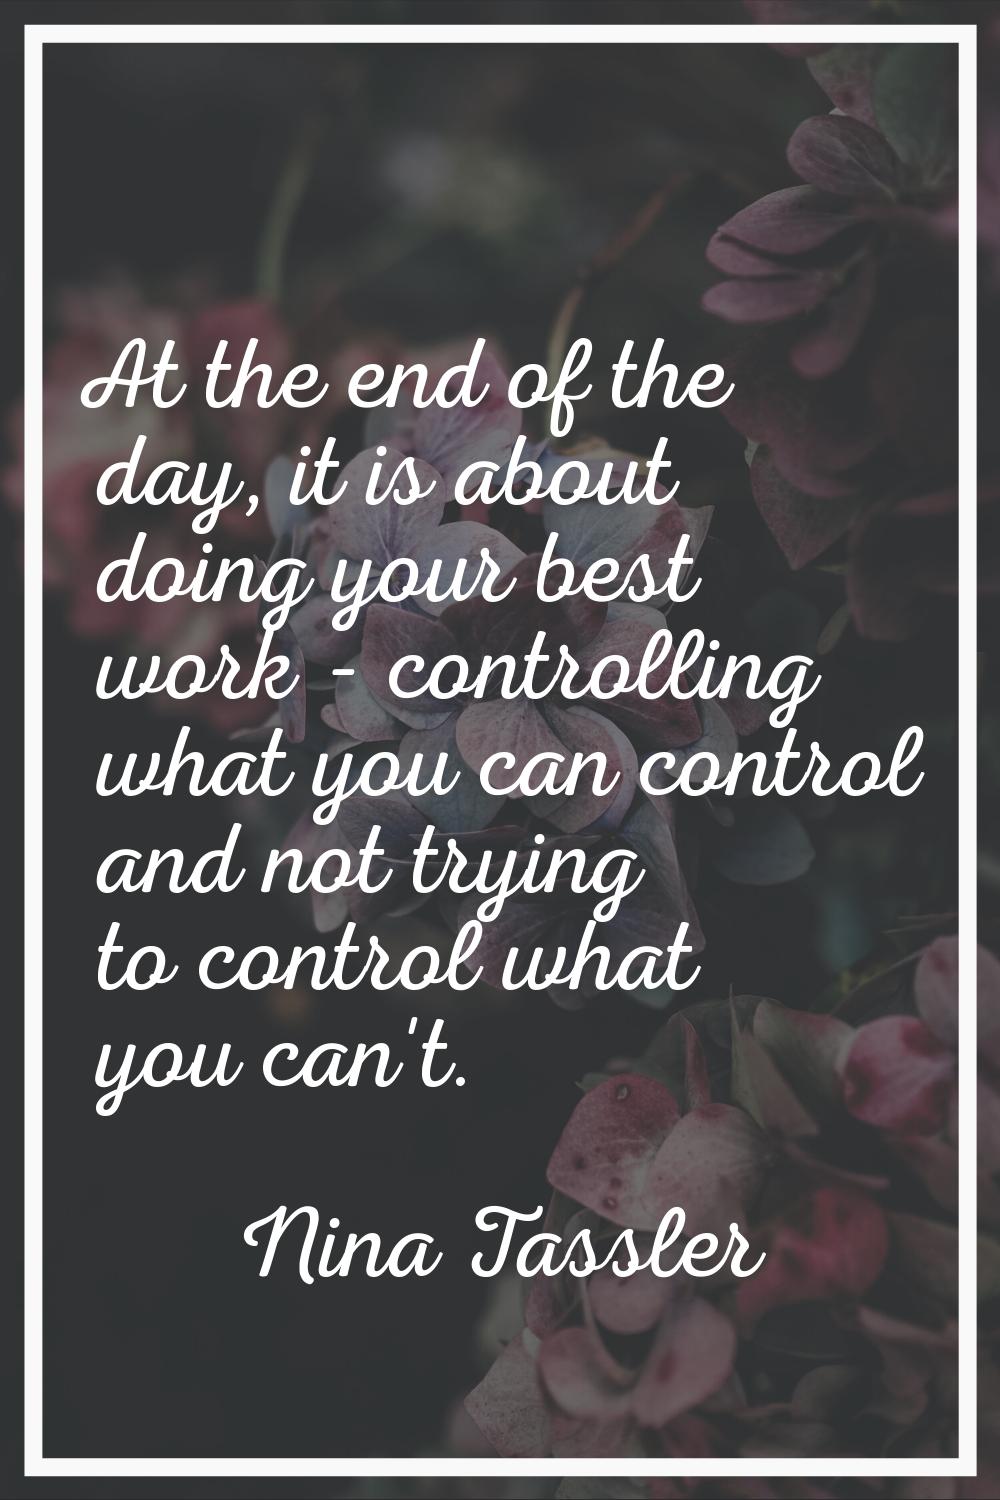 At the end of the day, it is about doing your best work - controlling what you can control and not 